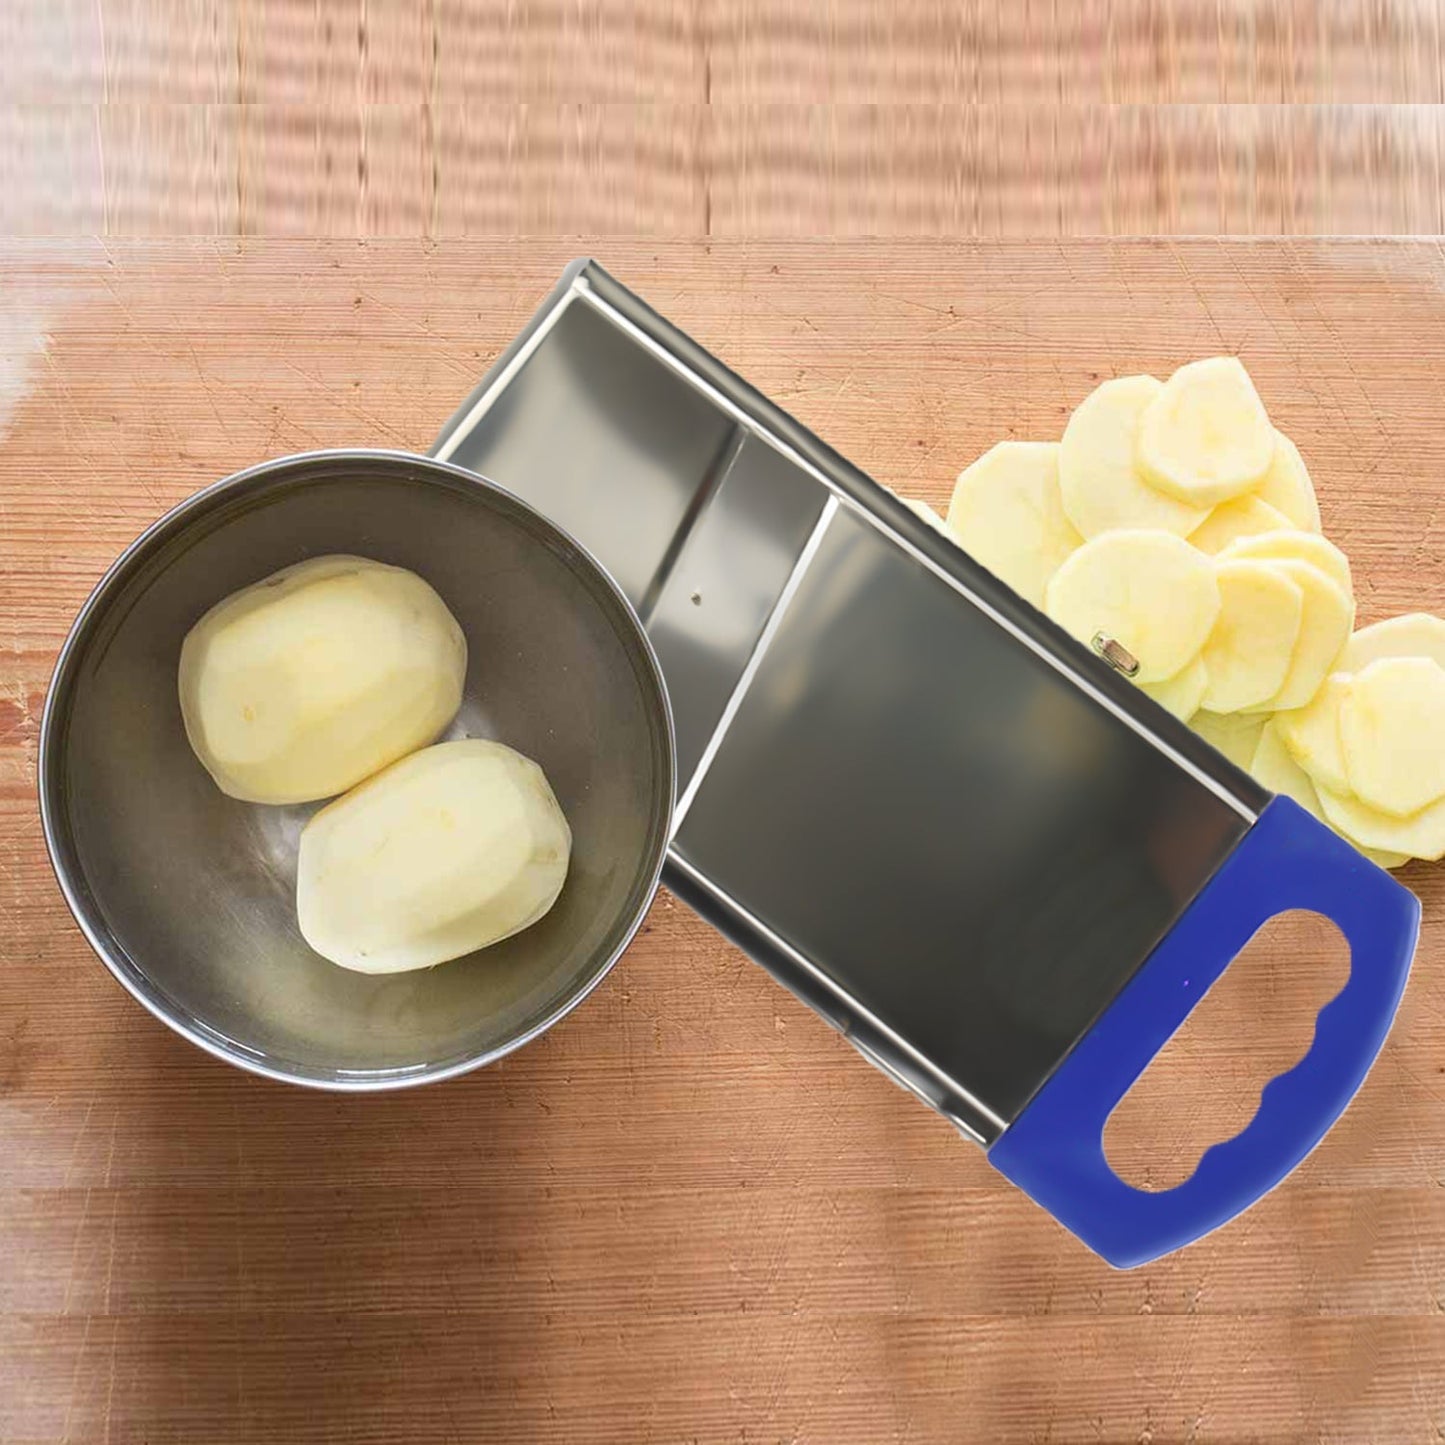 2689 Plain Potato Slicer used in all kinds of household kitchen purposes for cutting and slicing of potatoes.